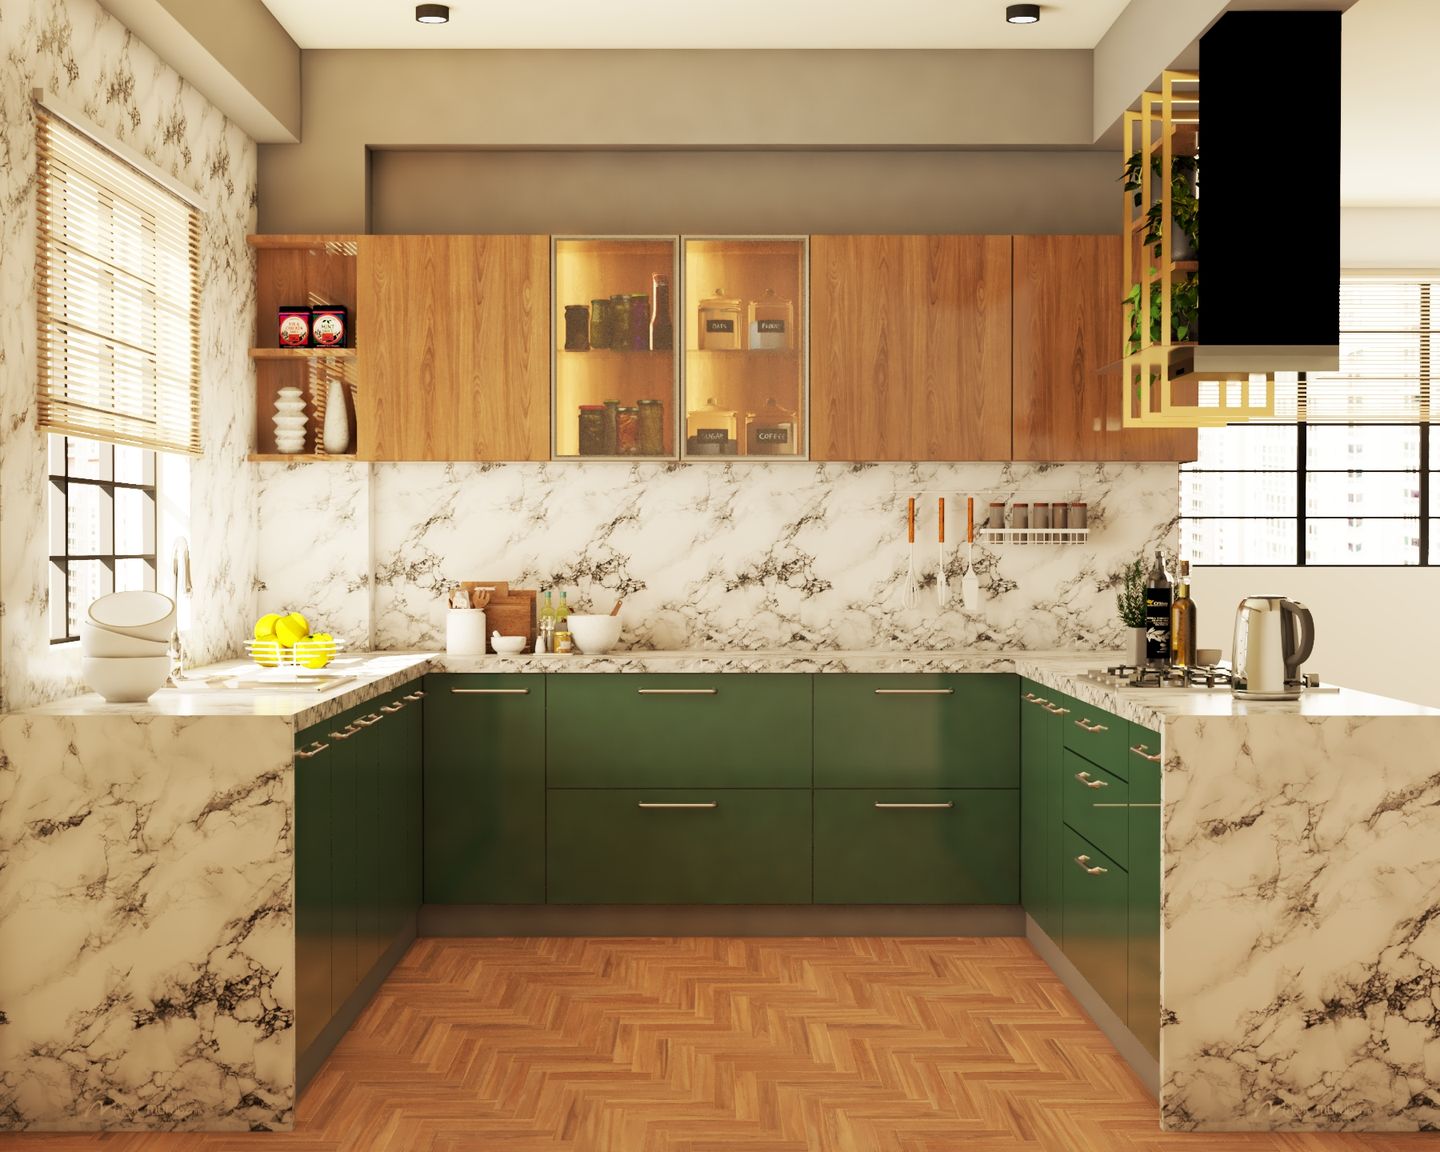 U-Shaped Kitchen With Emerald Green Cabinets - Livspace